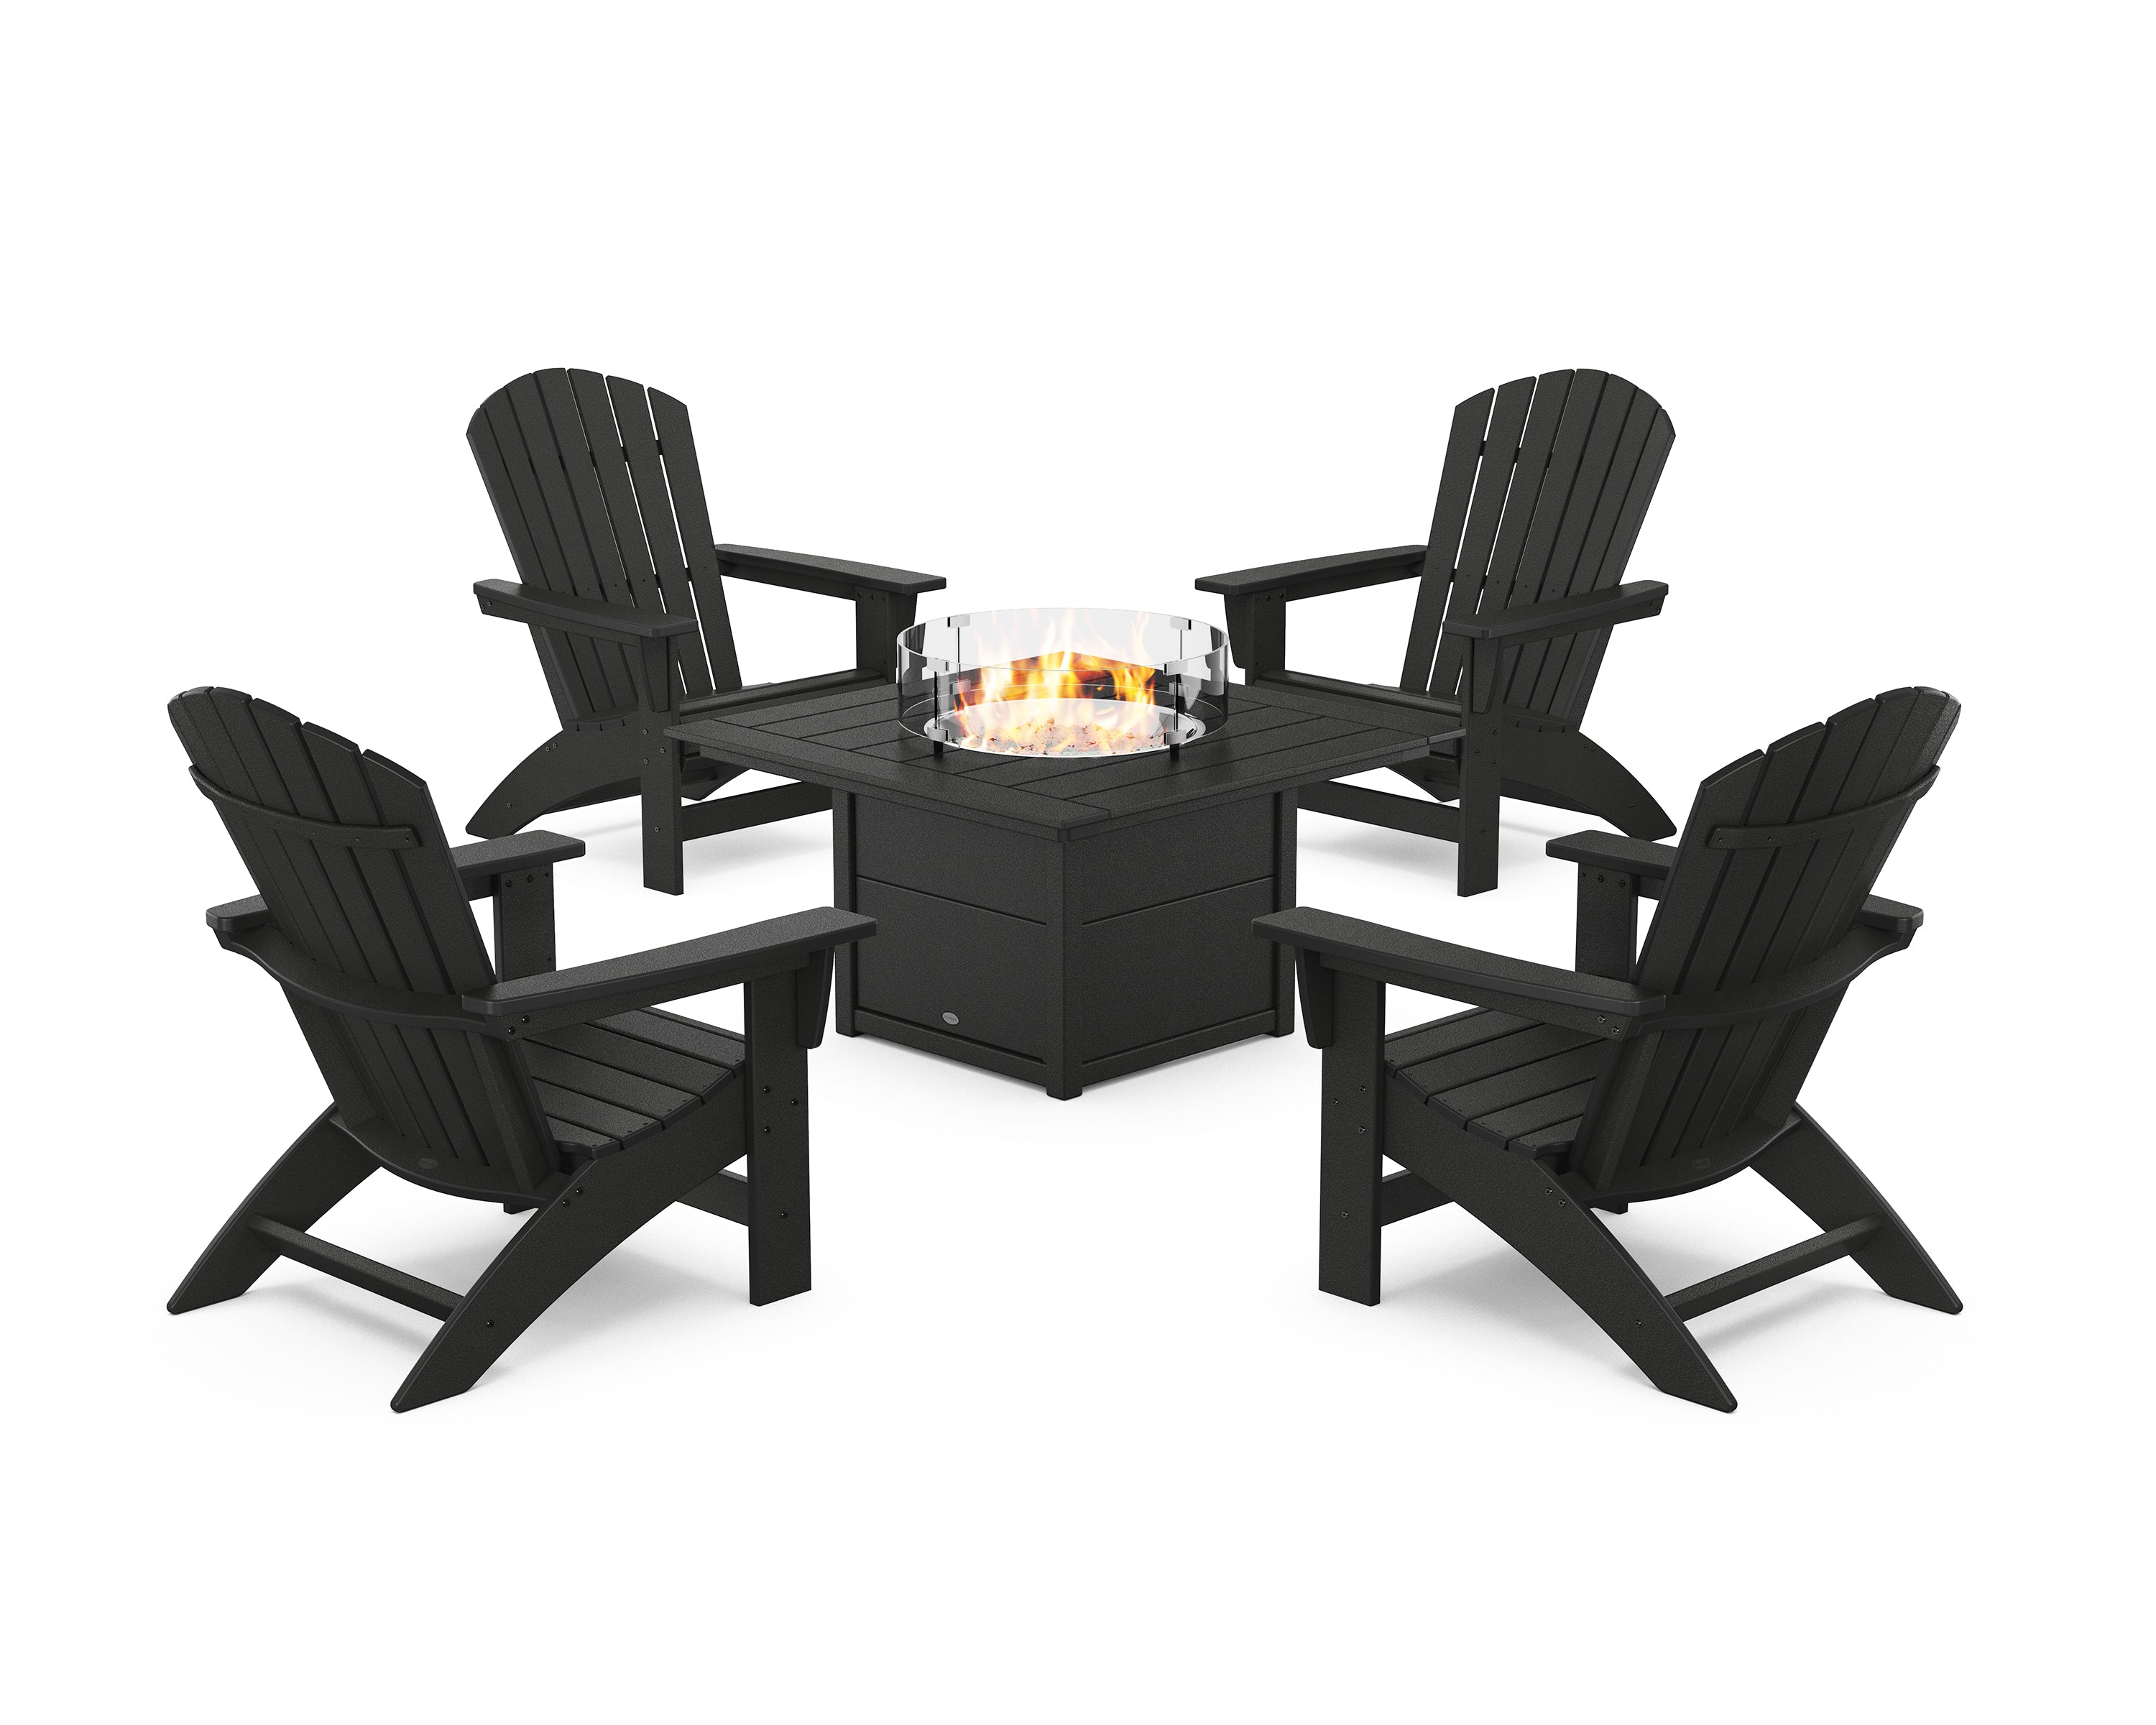 POLYWOOD® 5-Piece Nautical Grand Adirondack Conversation Set with Fire Pit Table in Black